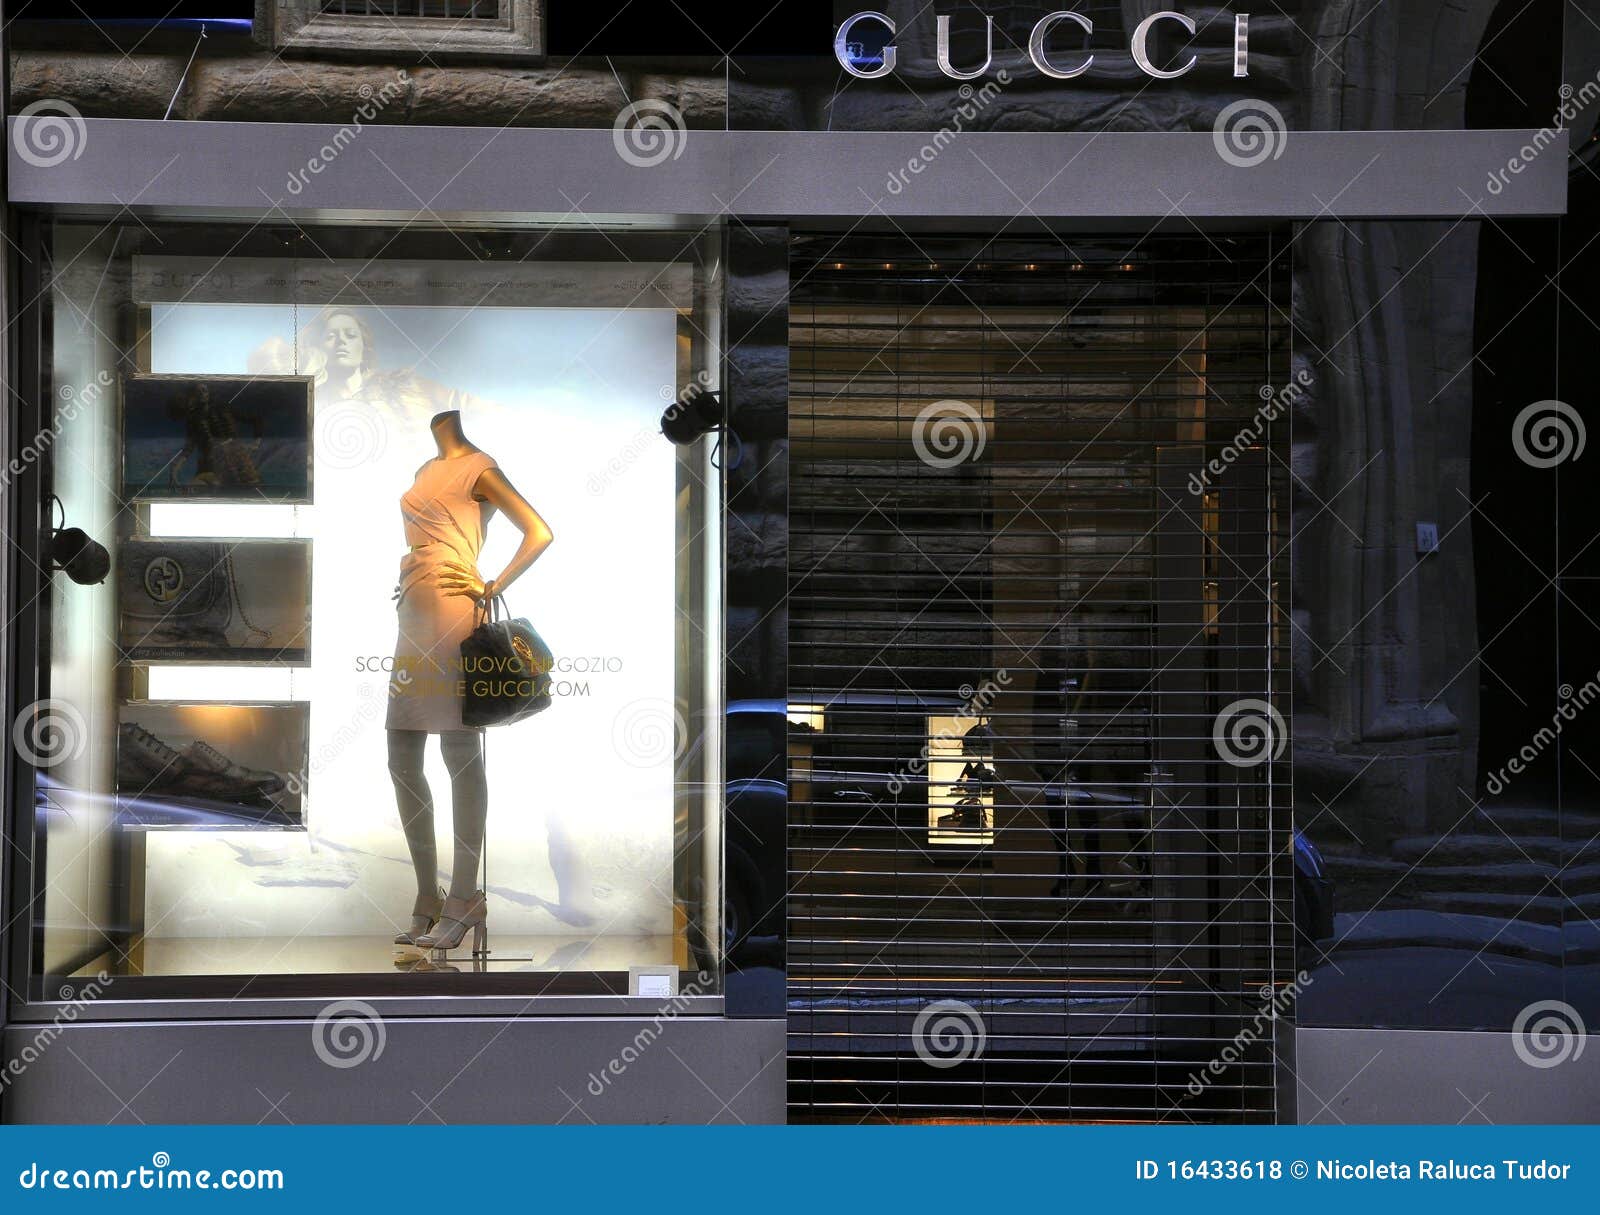 Gucci High Fashion Store In Florence, Italy Editorial Stock Photo - Image of display, brand ...